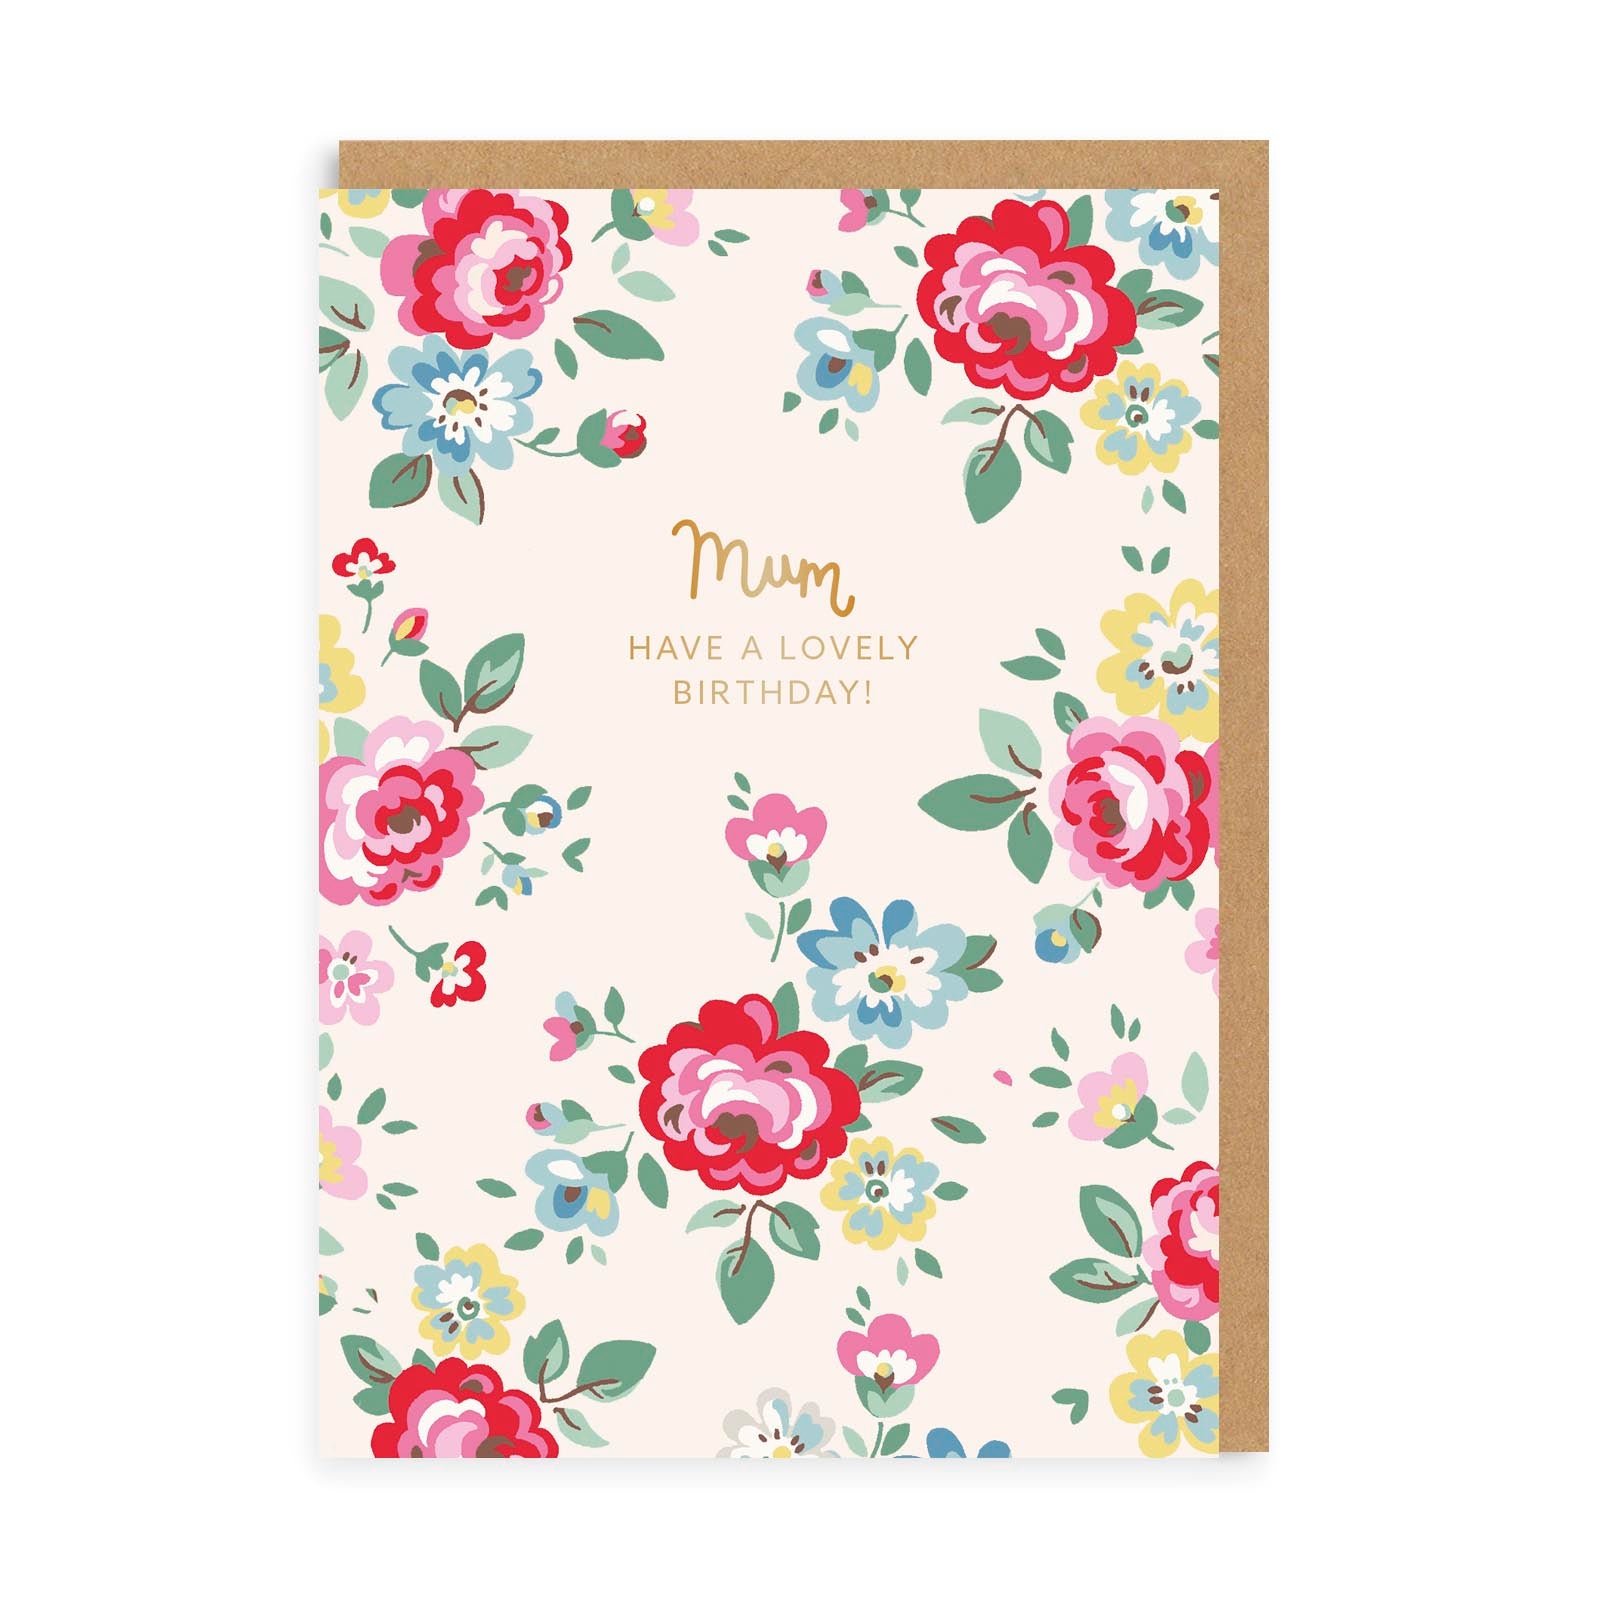 Birthday Card for Mum - Have a lovely Birthday Card